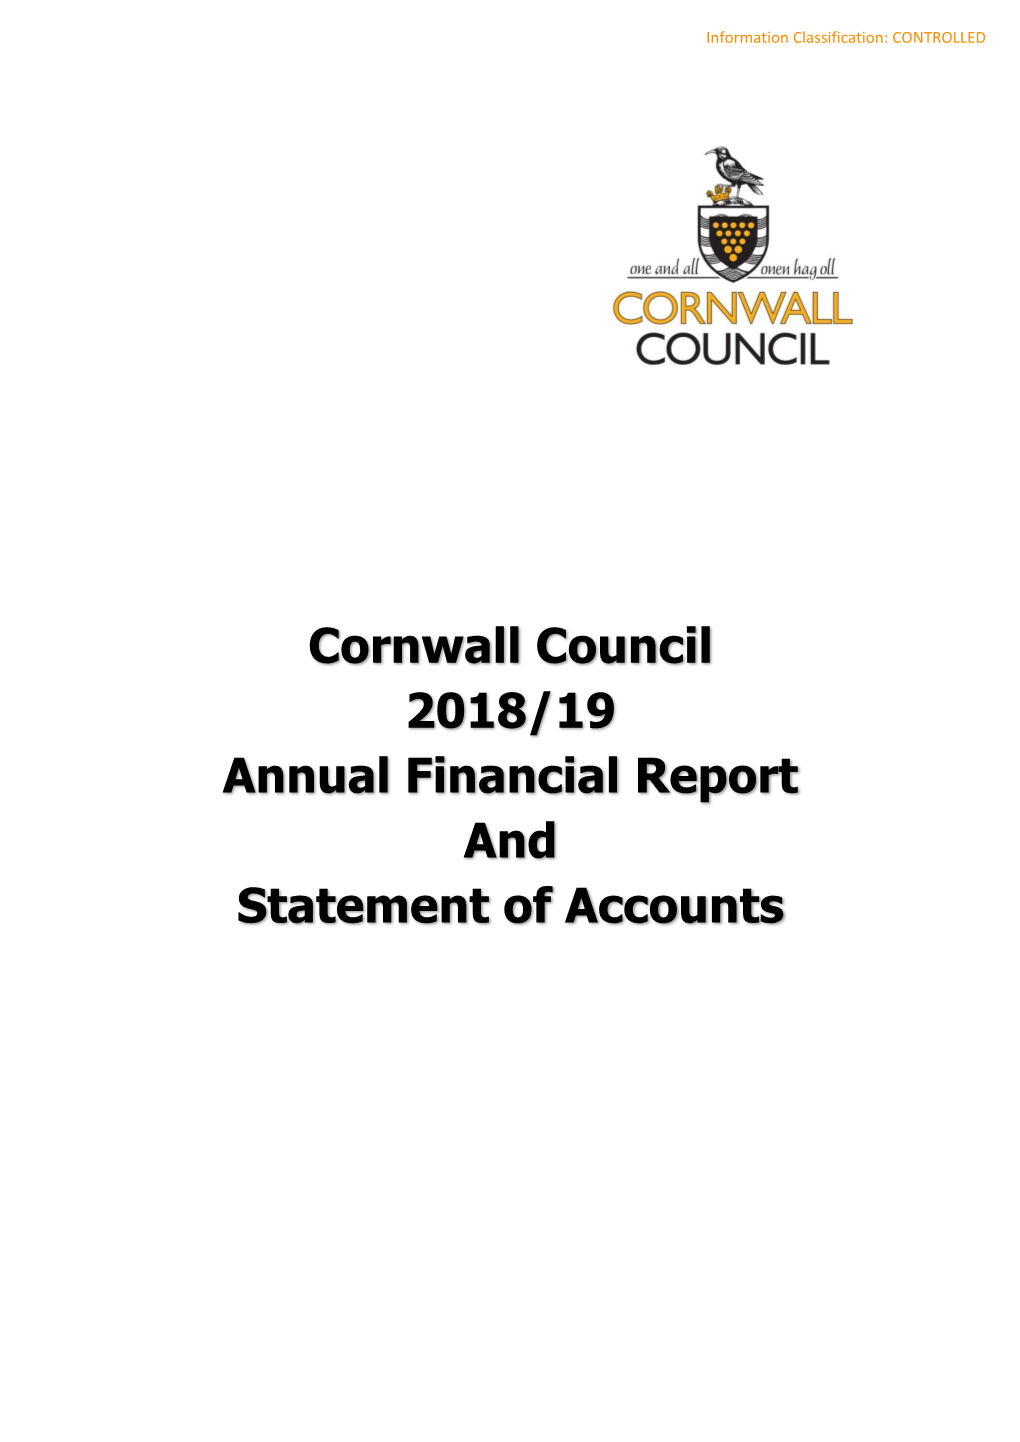 Cornwall Council 2018/19 Annual Financial Report and Statement of Accounts